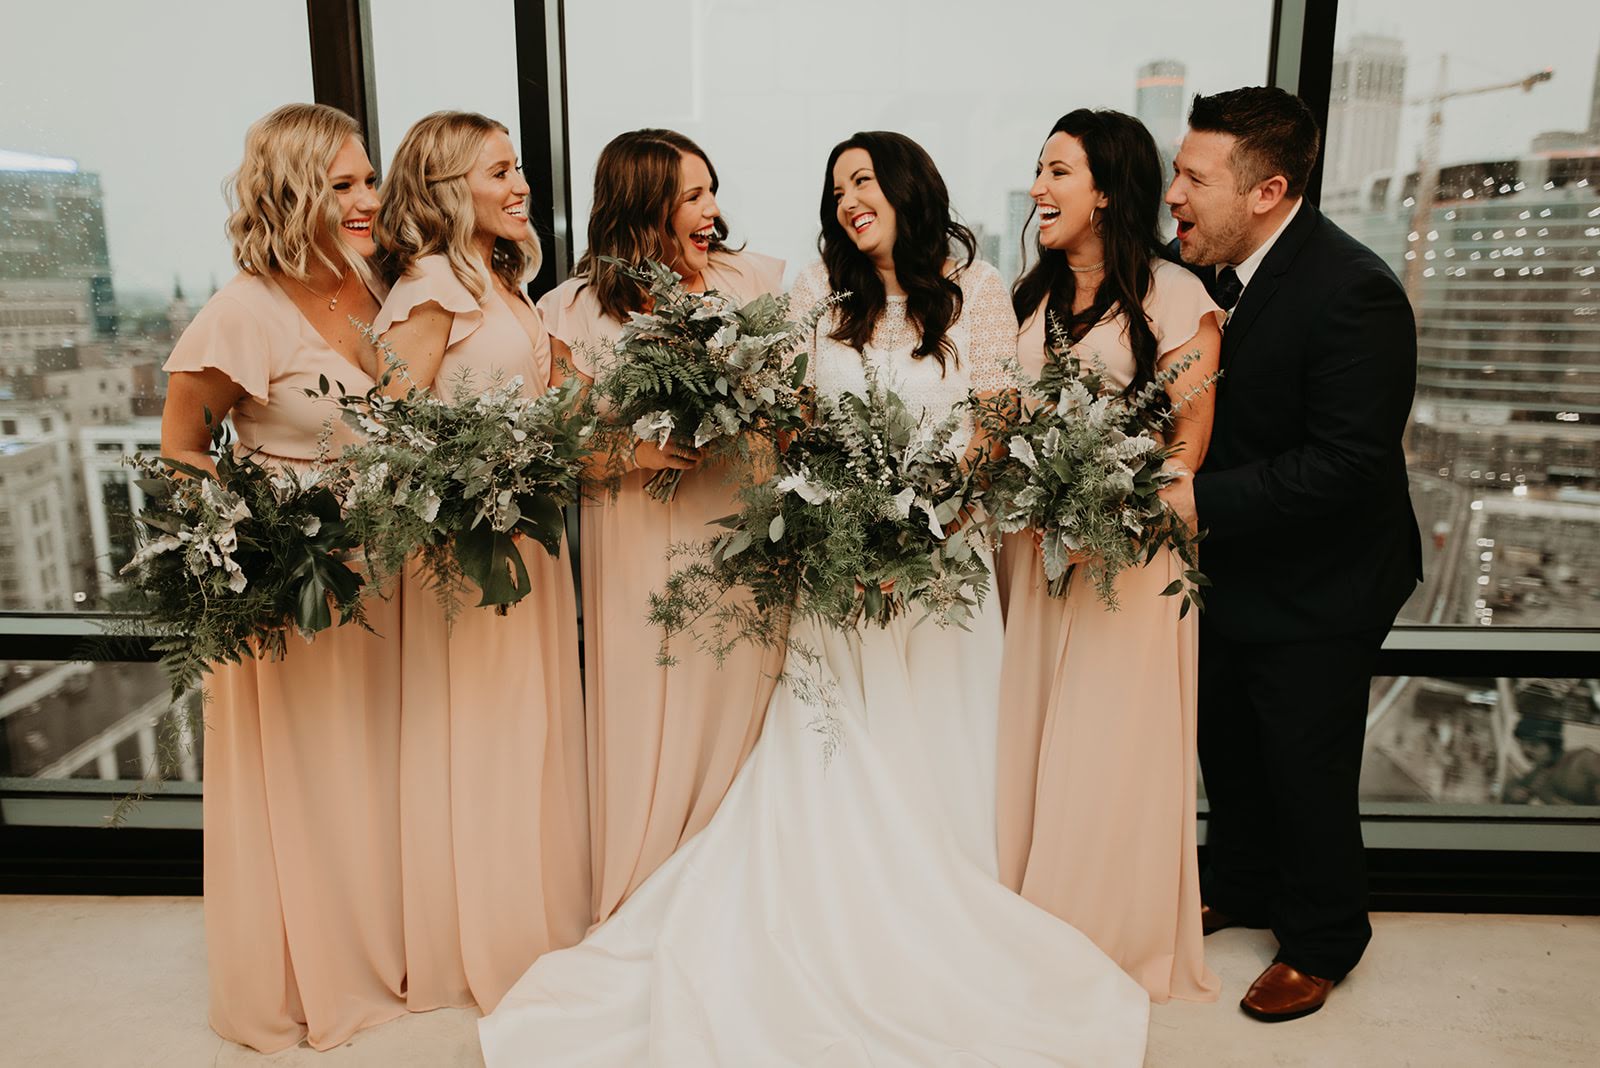 All greens all the way for this bridal party!